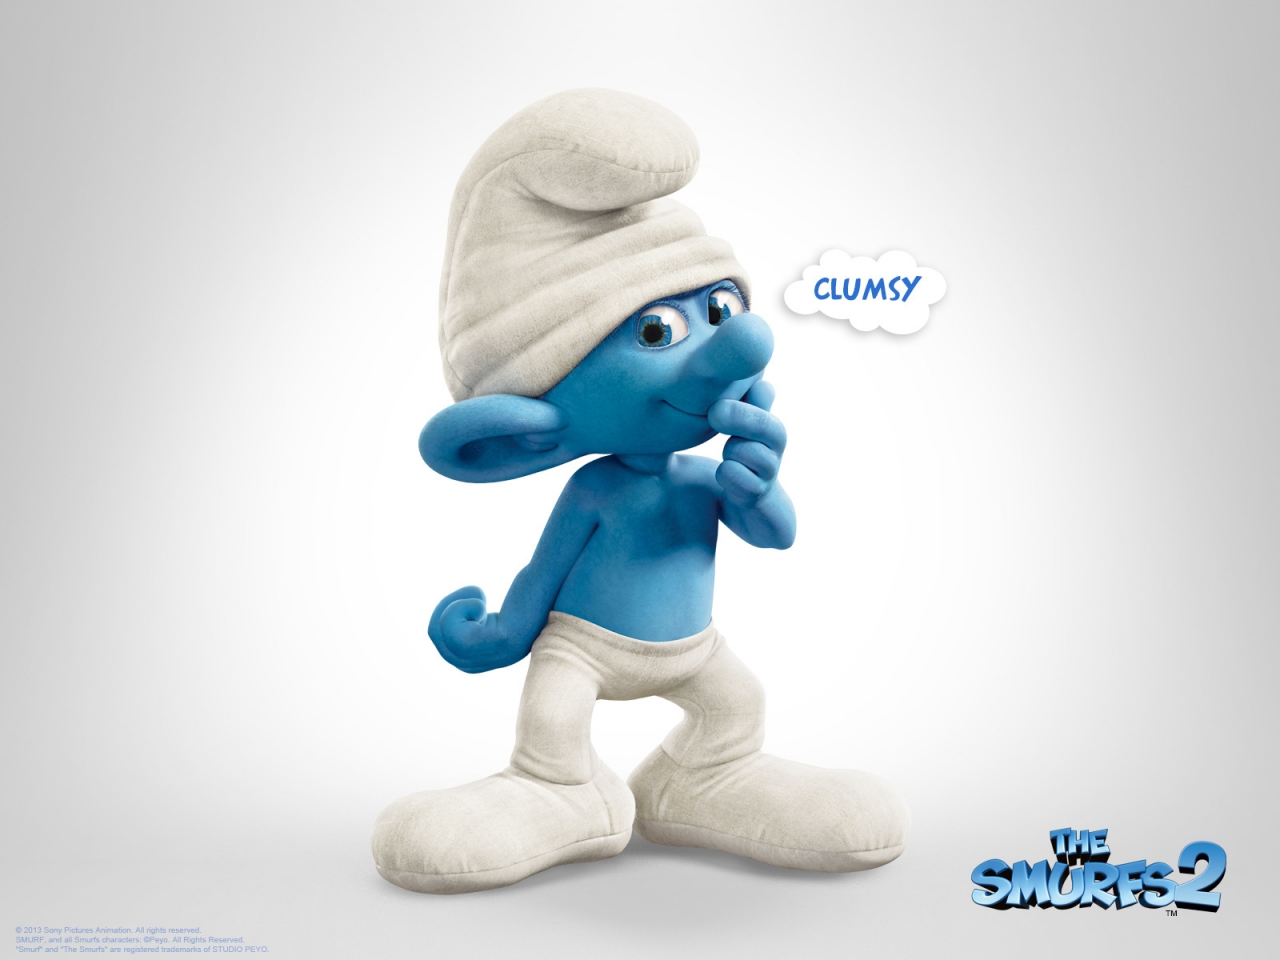 Clumsy The Smurfs 2 for 1280 x 960 resolution